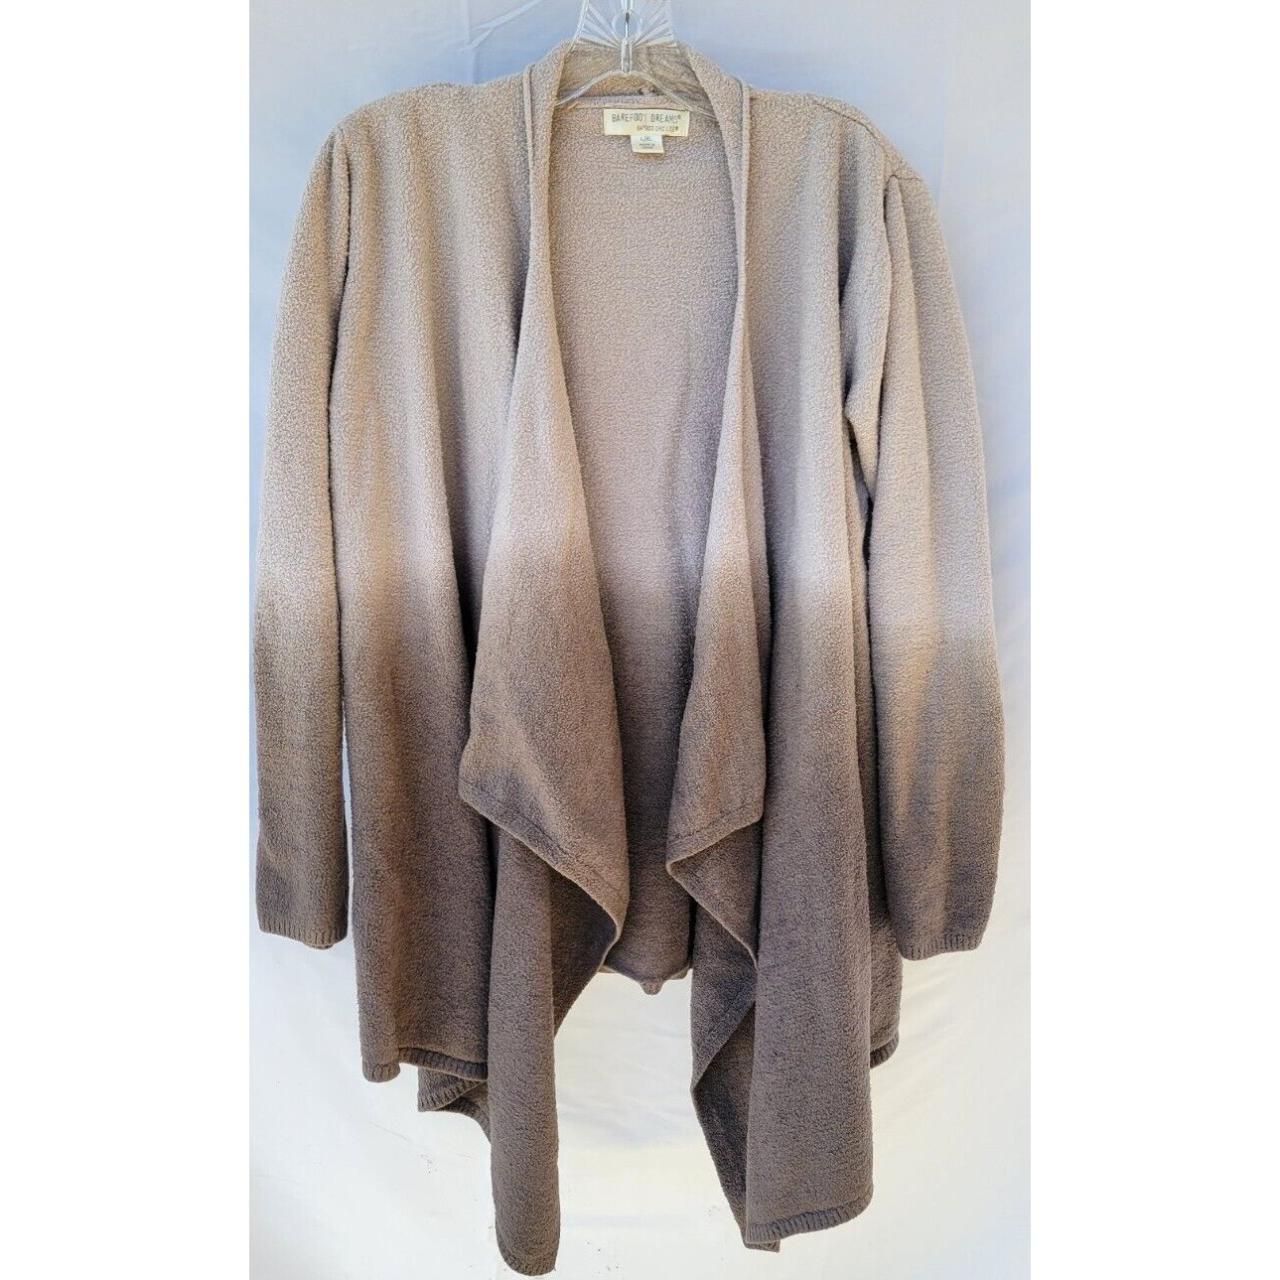 This Barefoot Dreams Bamboo Cozy Chic Lite Wrap... - Depop